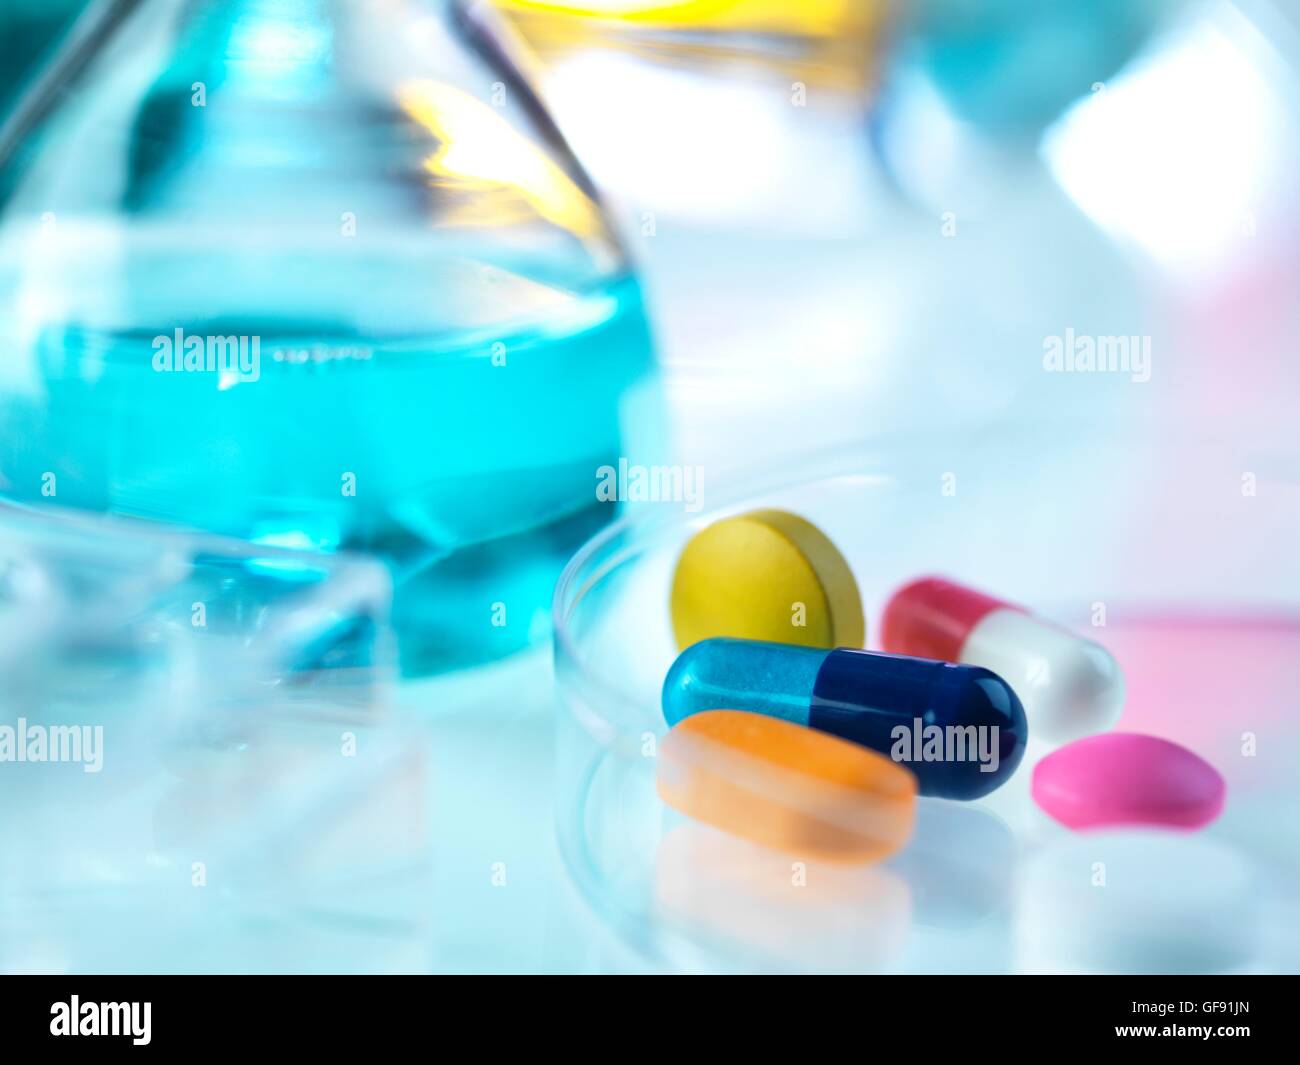 PROPERTY RELEASED. Pharmaceutical research, conceptual image. Stock Photo